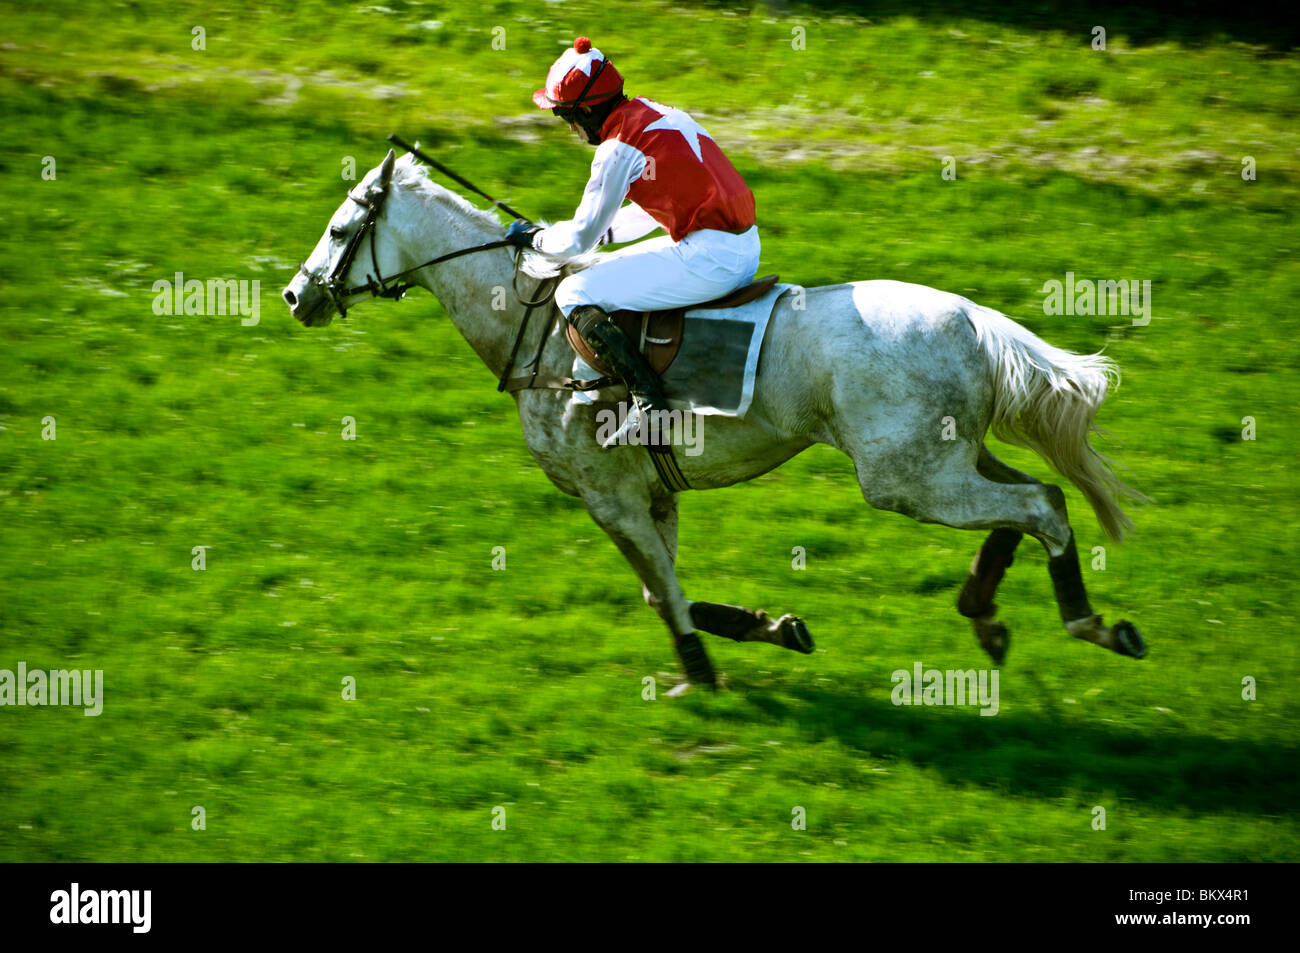 a jockey with his horse during a horse race Stock Photo